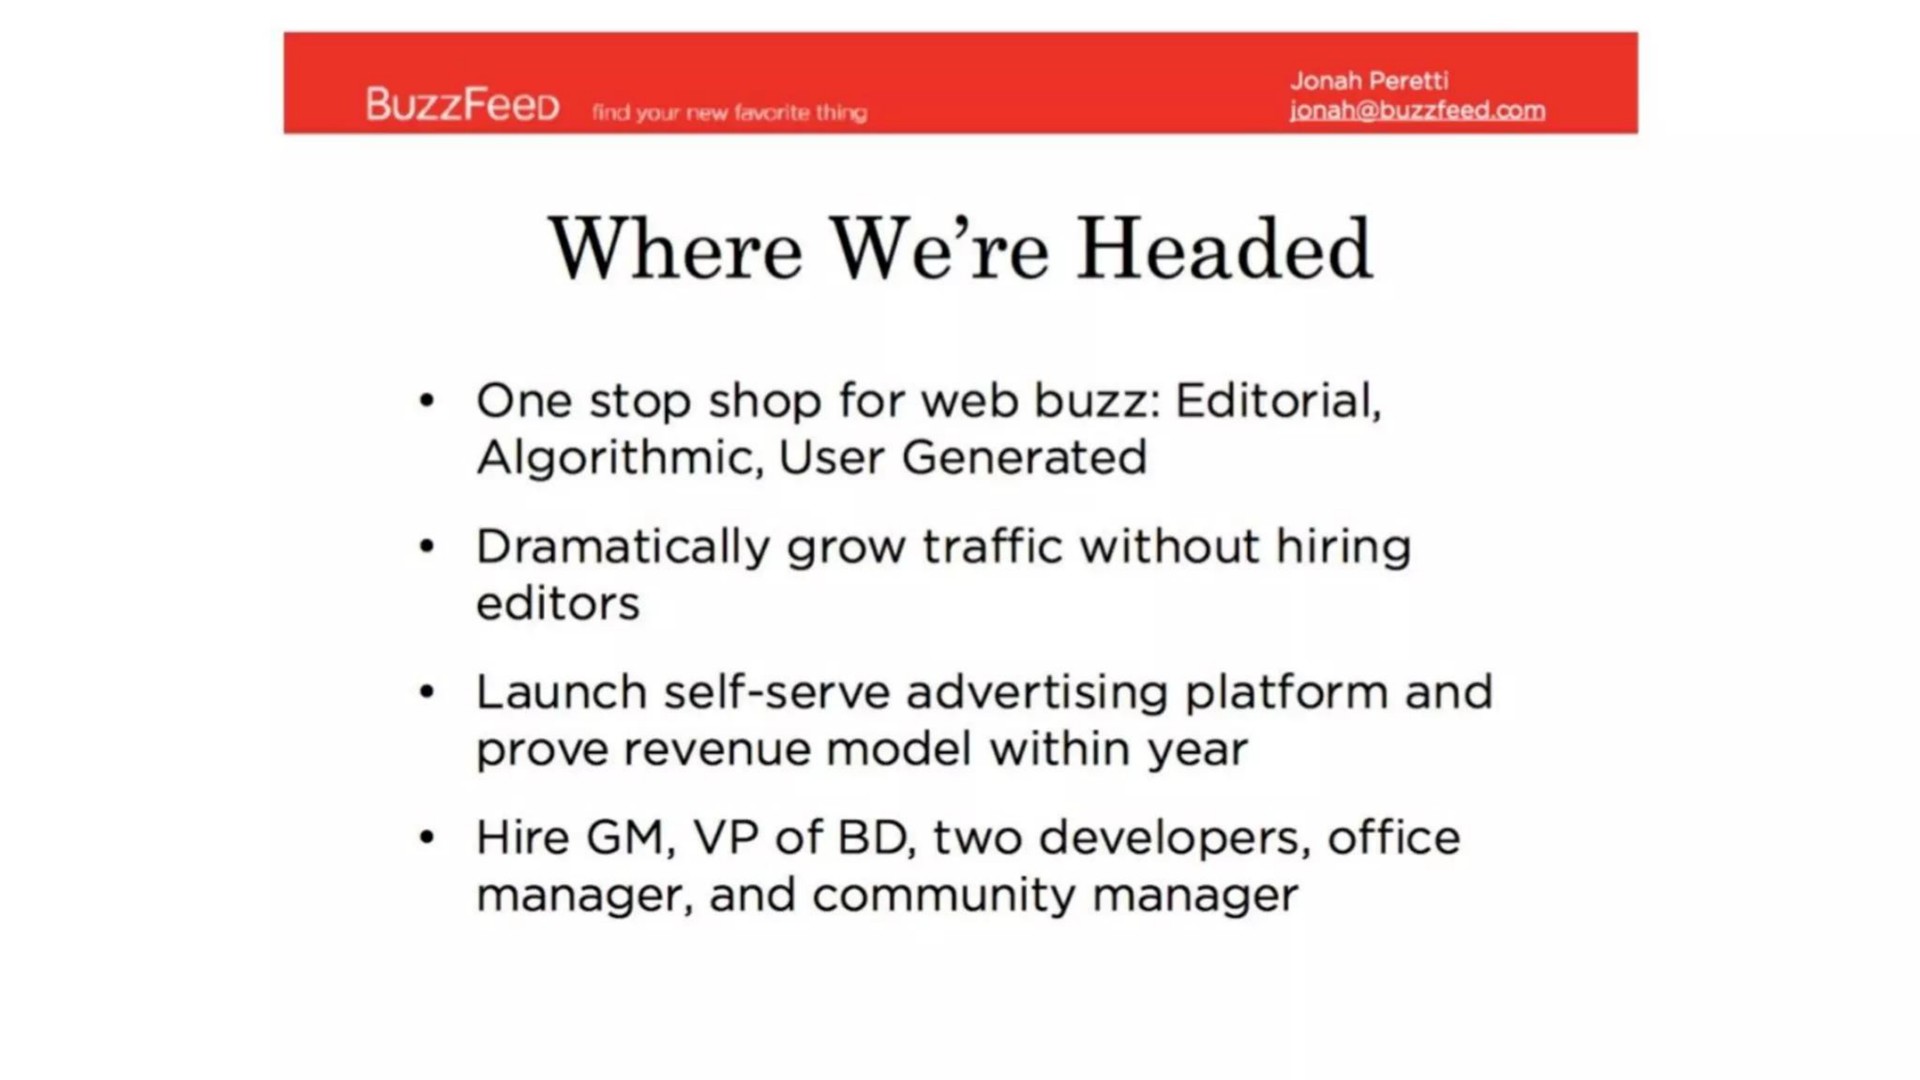 spot where we headed one stop shop for web buzz editorial algorithmic user generated dramatically grow traffic without hiring editors launch self serve advertising platform and prove revenue model within year hire of two developers office manager and community manager | BuzzFeed